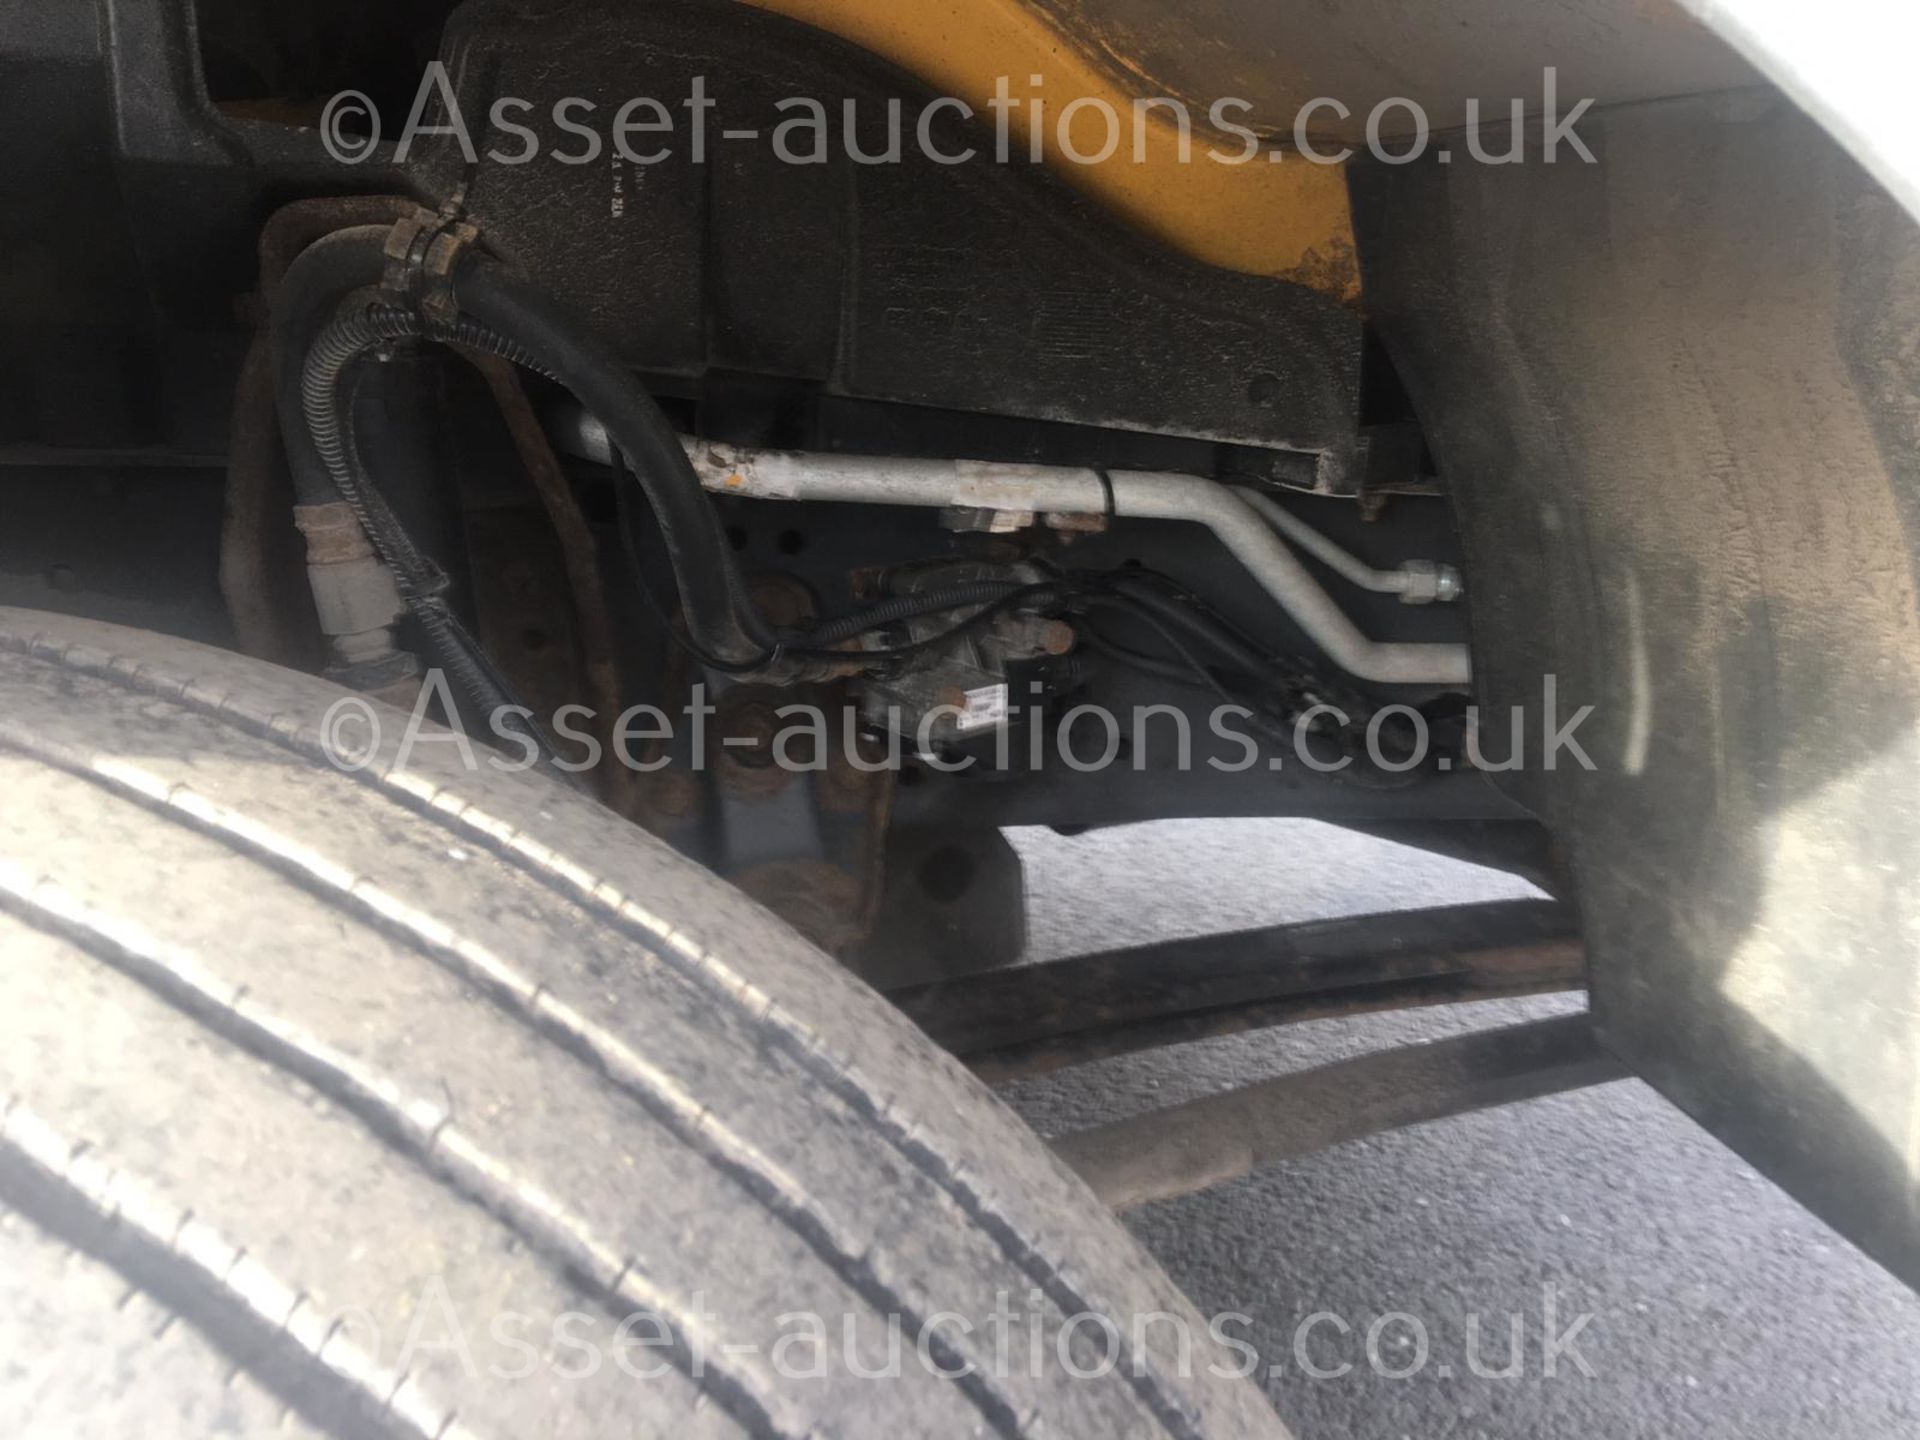 2004/54 REG MERCEDES ATEGO 1018 DAY YELLOW DROPSIDE LINE PAINTING LORRY 4.3L DIESEL ENGINE *NO VAT* - Image 29 of 128